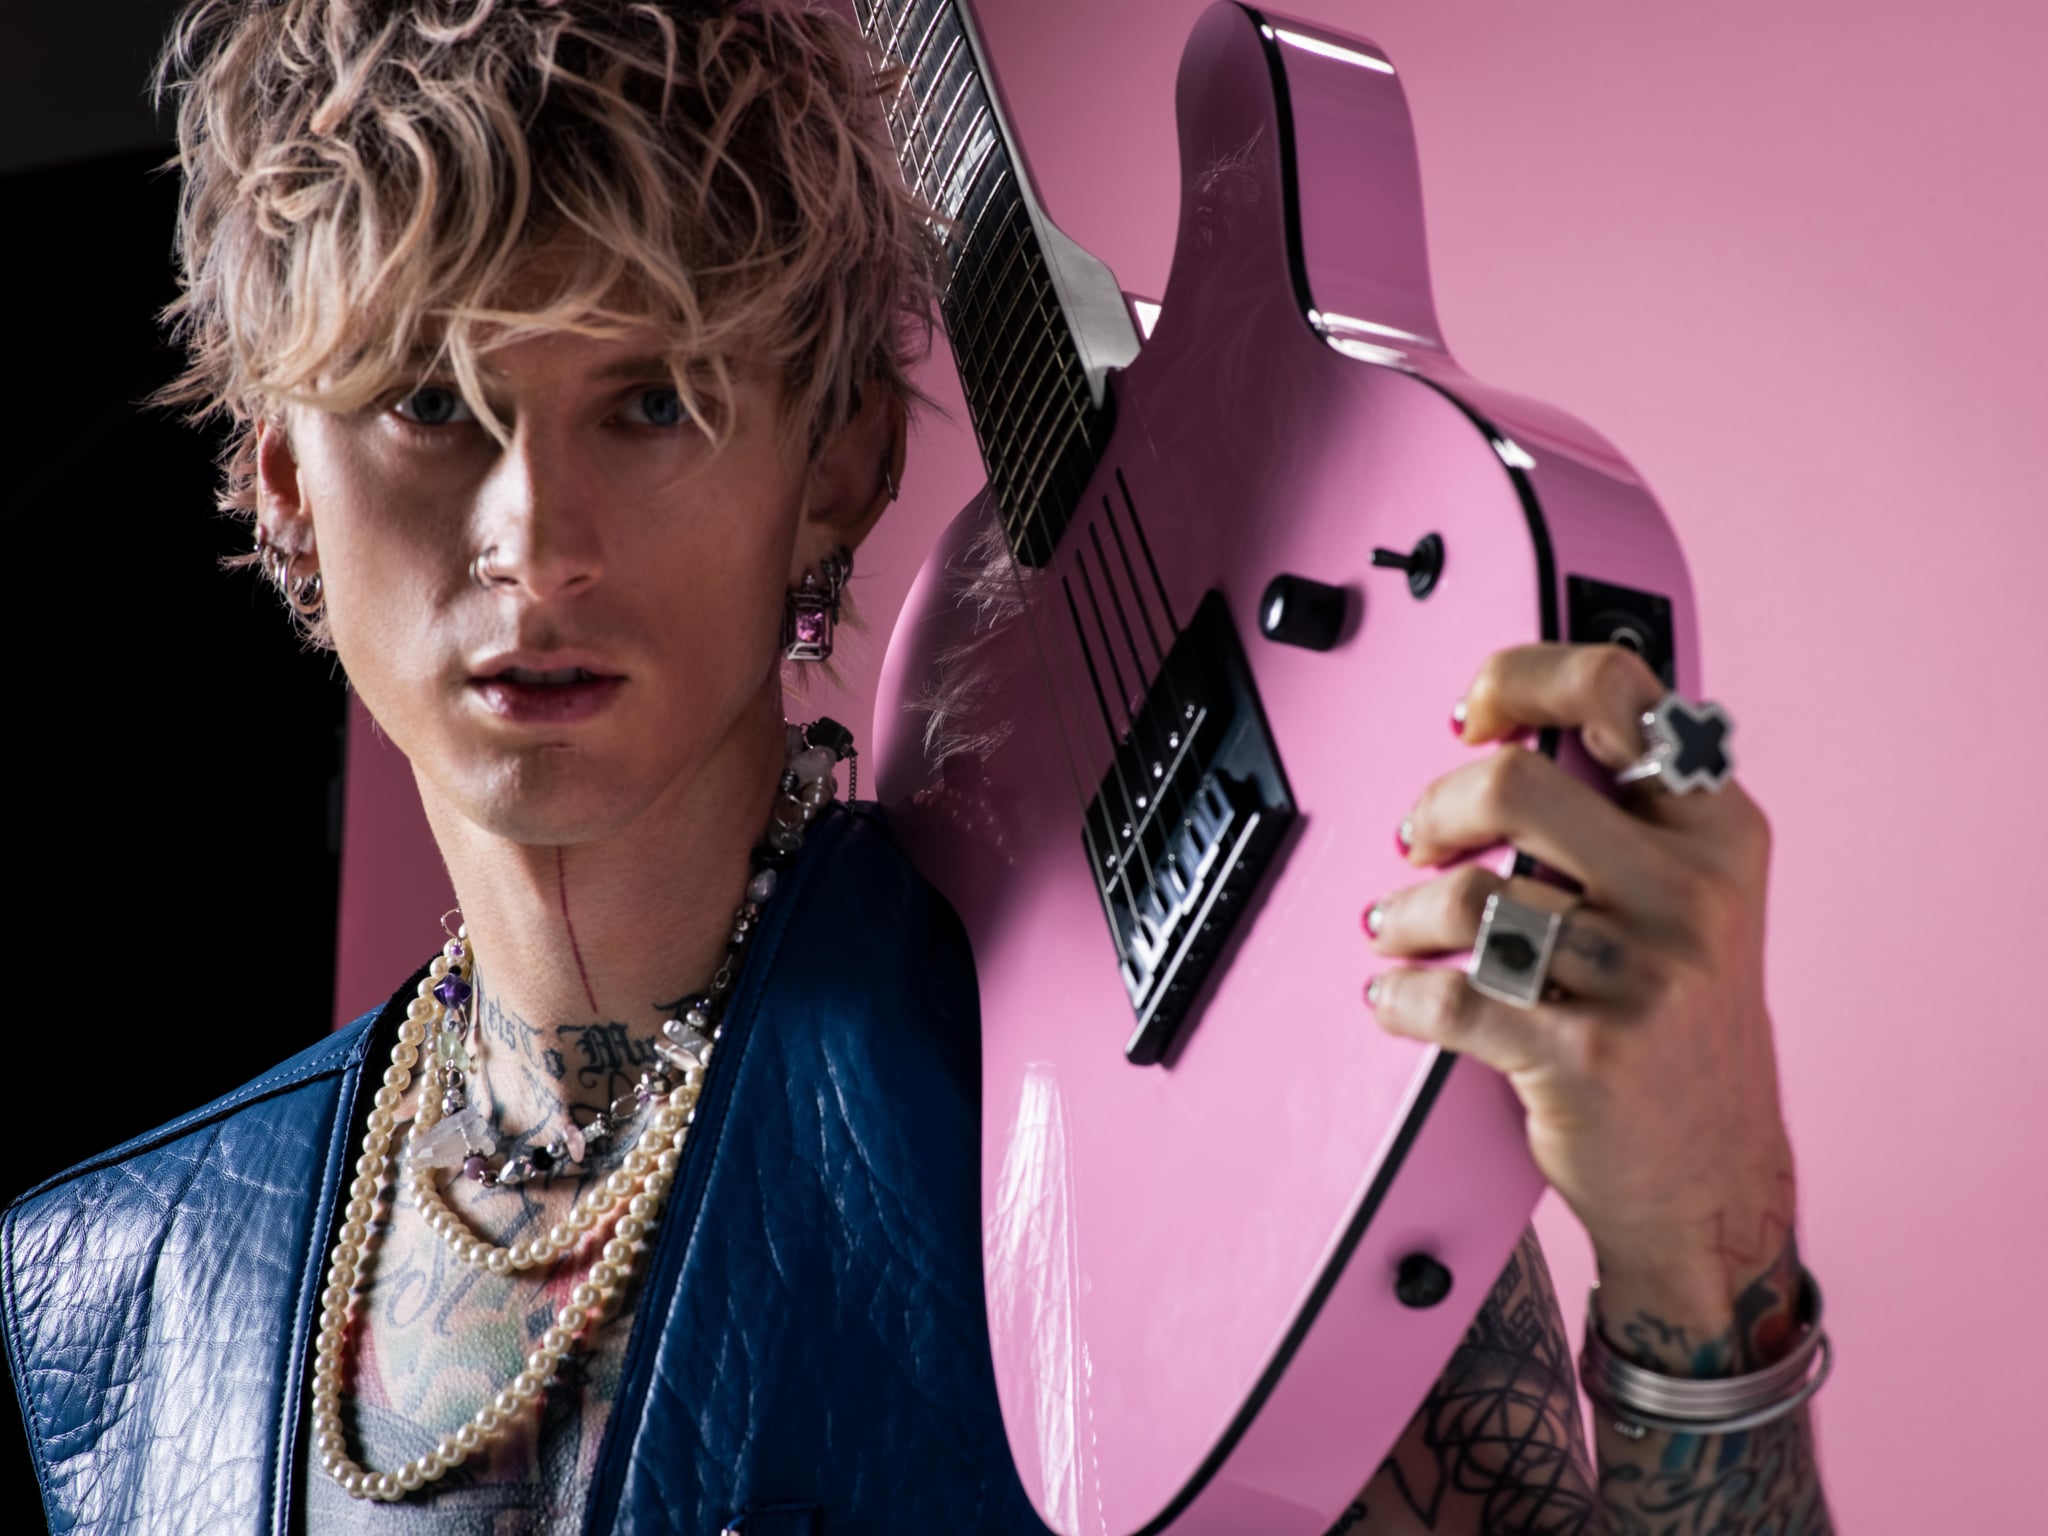 MGK's passion for his music had a negative impact on his. Machine Gun Kelly Opens Up About His Trauma and Struggles in Life in Pink Doc